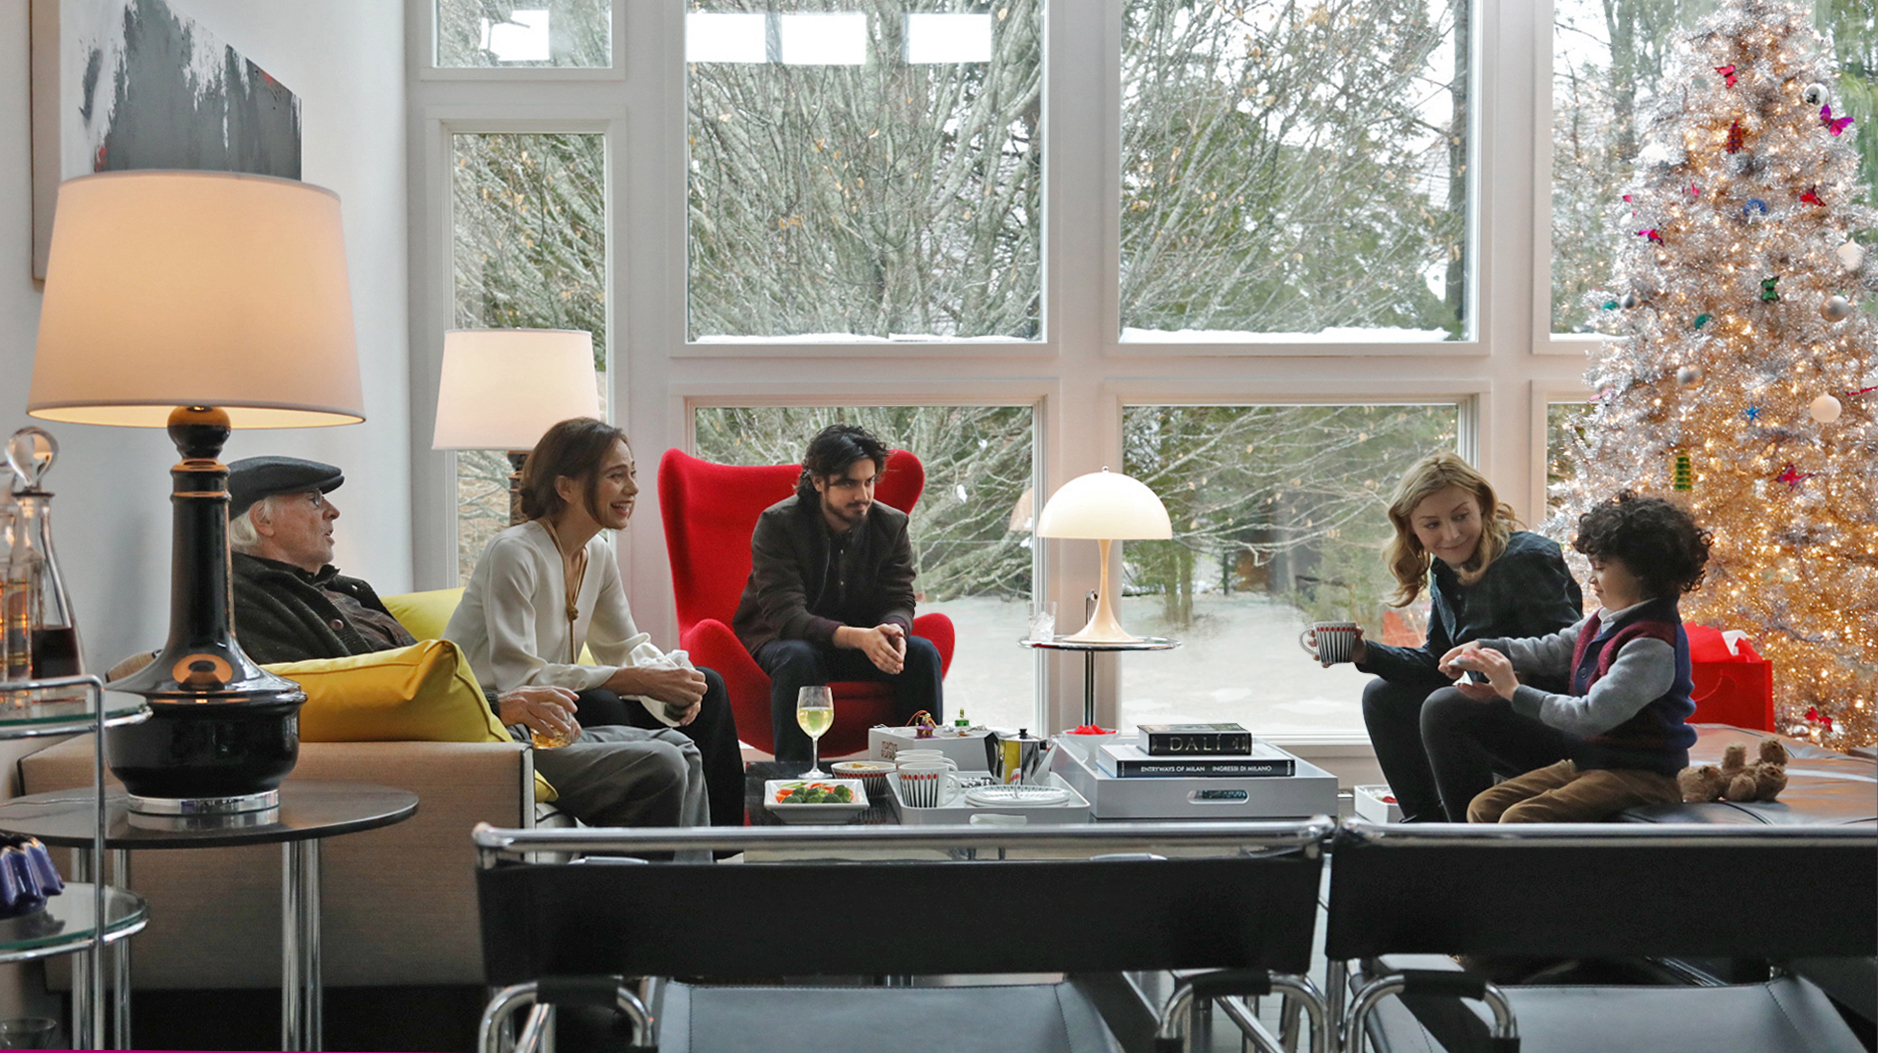 Richard (Bruce Dern), Claire (Lena Olin), Danny (Avan Jogia), Angela (Juliet Rylance), and Gogo (Ravi Cabot-Conyers) celebrate a Christmas visit after a long estrangement in THE ARTIST’S WIFE. Photo by Michael Lavine.